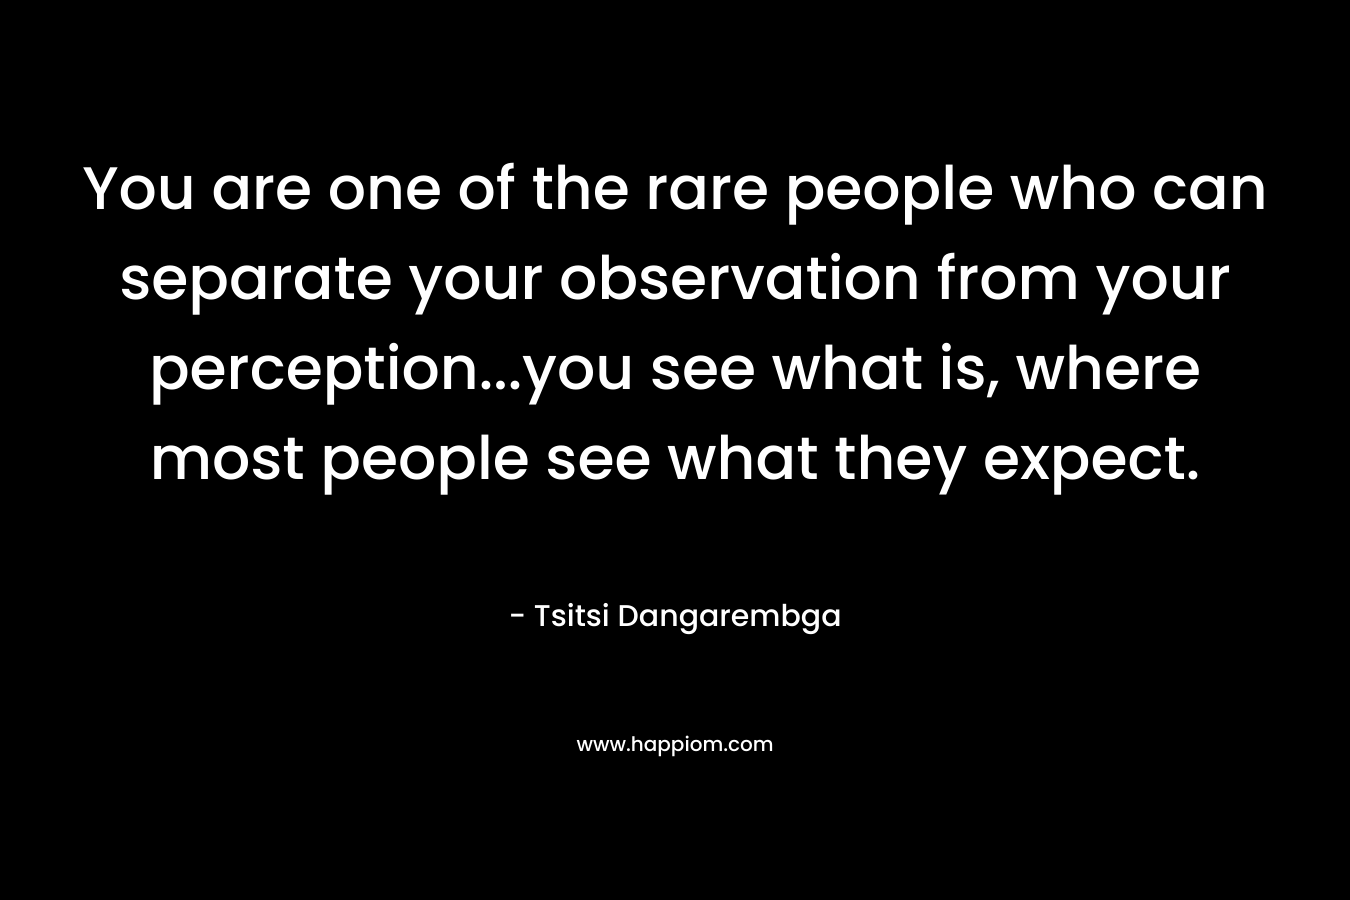 You are one of the rare people who can separate your observation from your perception...you see what is, where most people see what they expect.